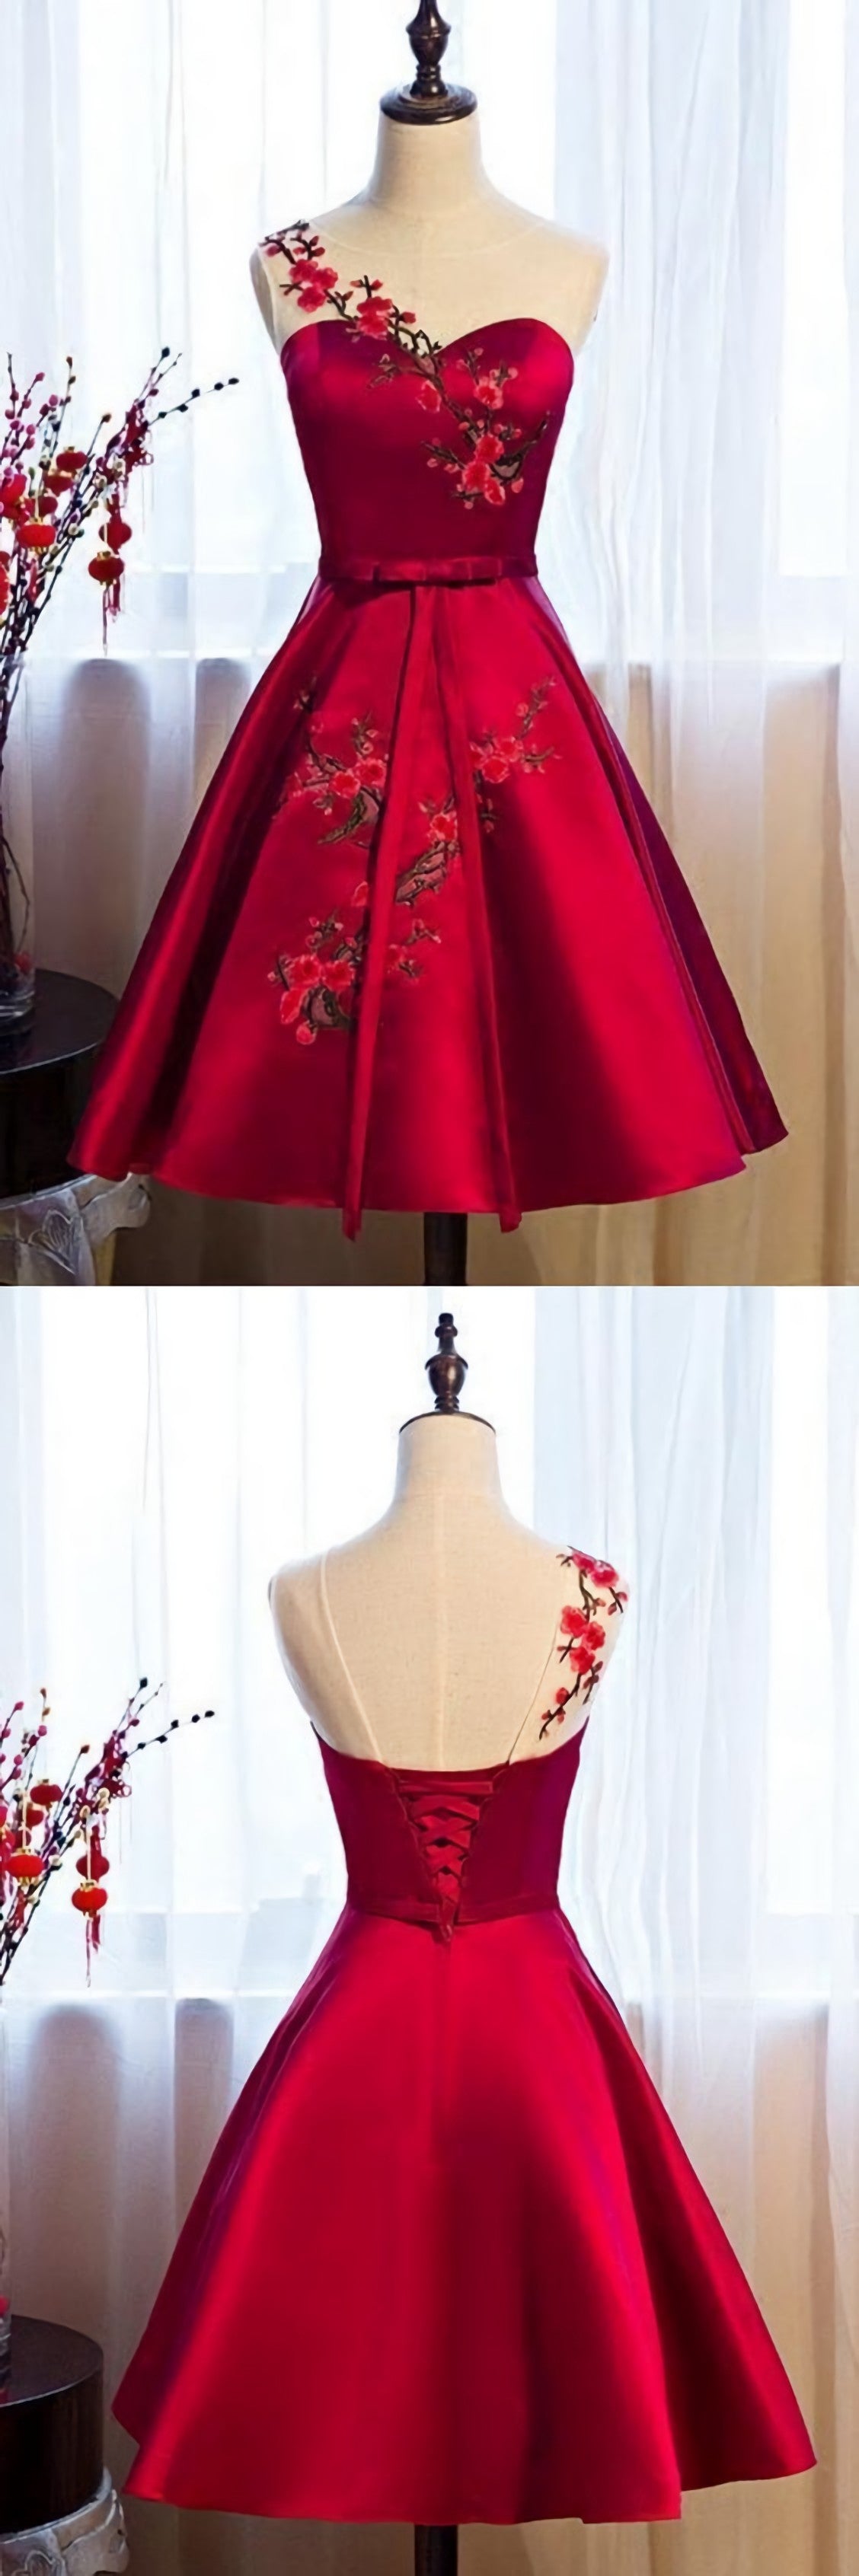 Prom Dress Dresses, Burgundy Satin Homecoming Dresses, With Applique